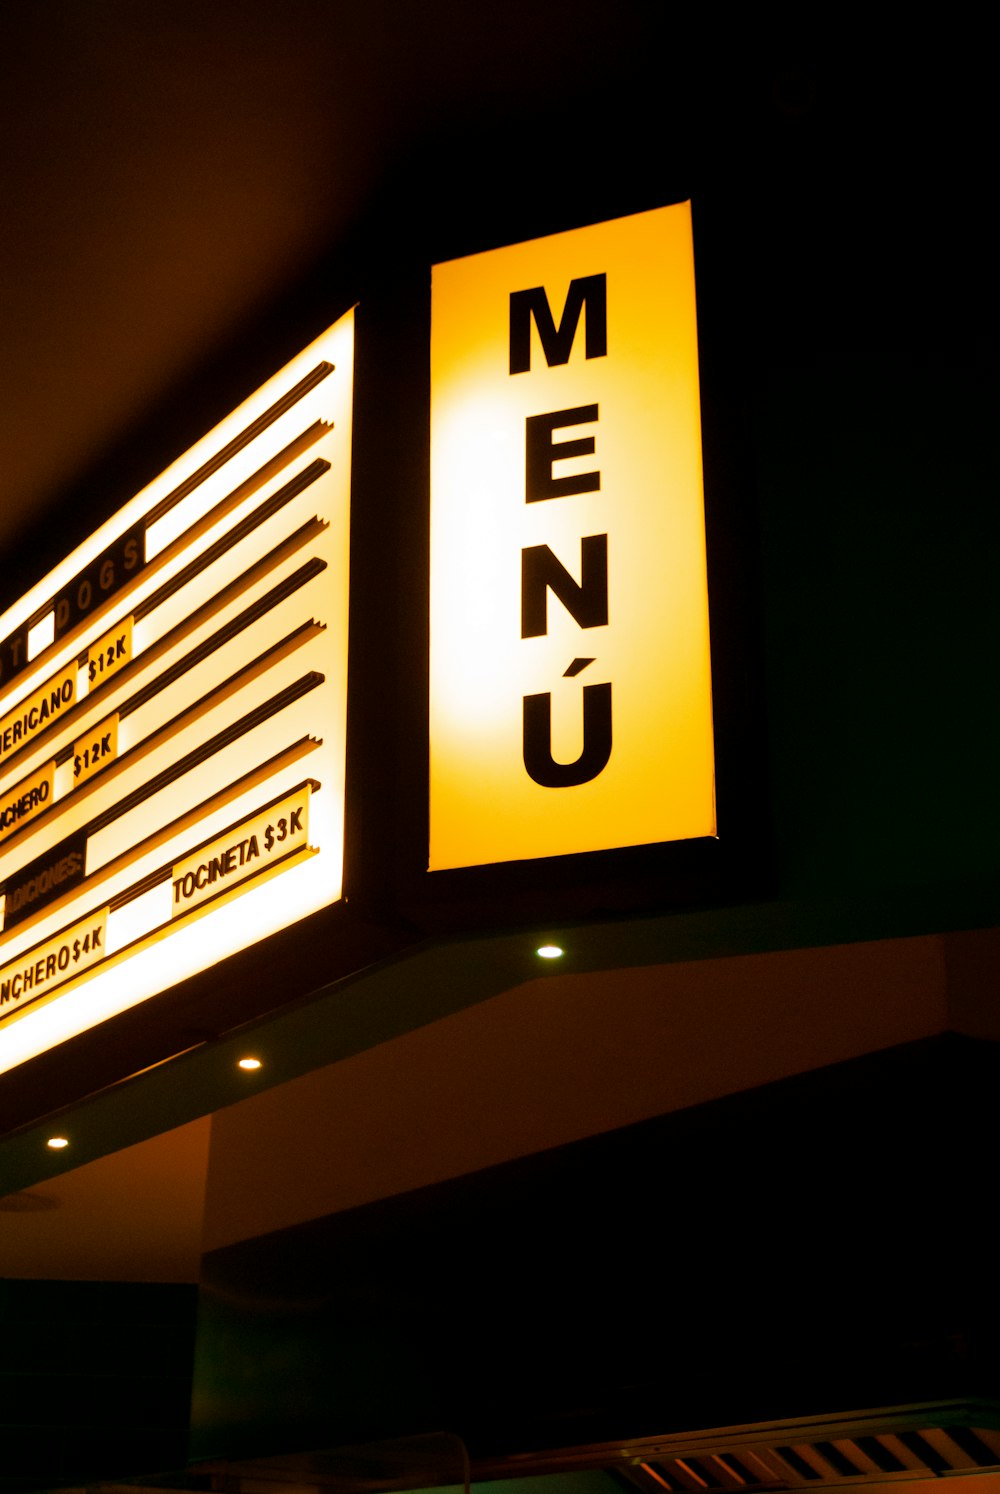 a menu sign is lit up in the dark